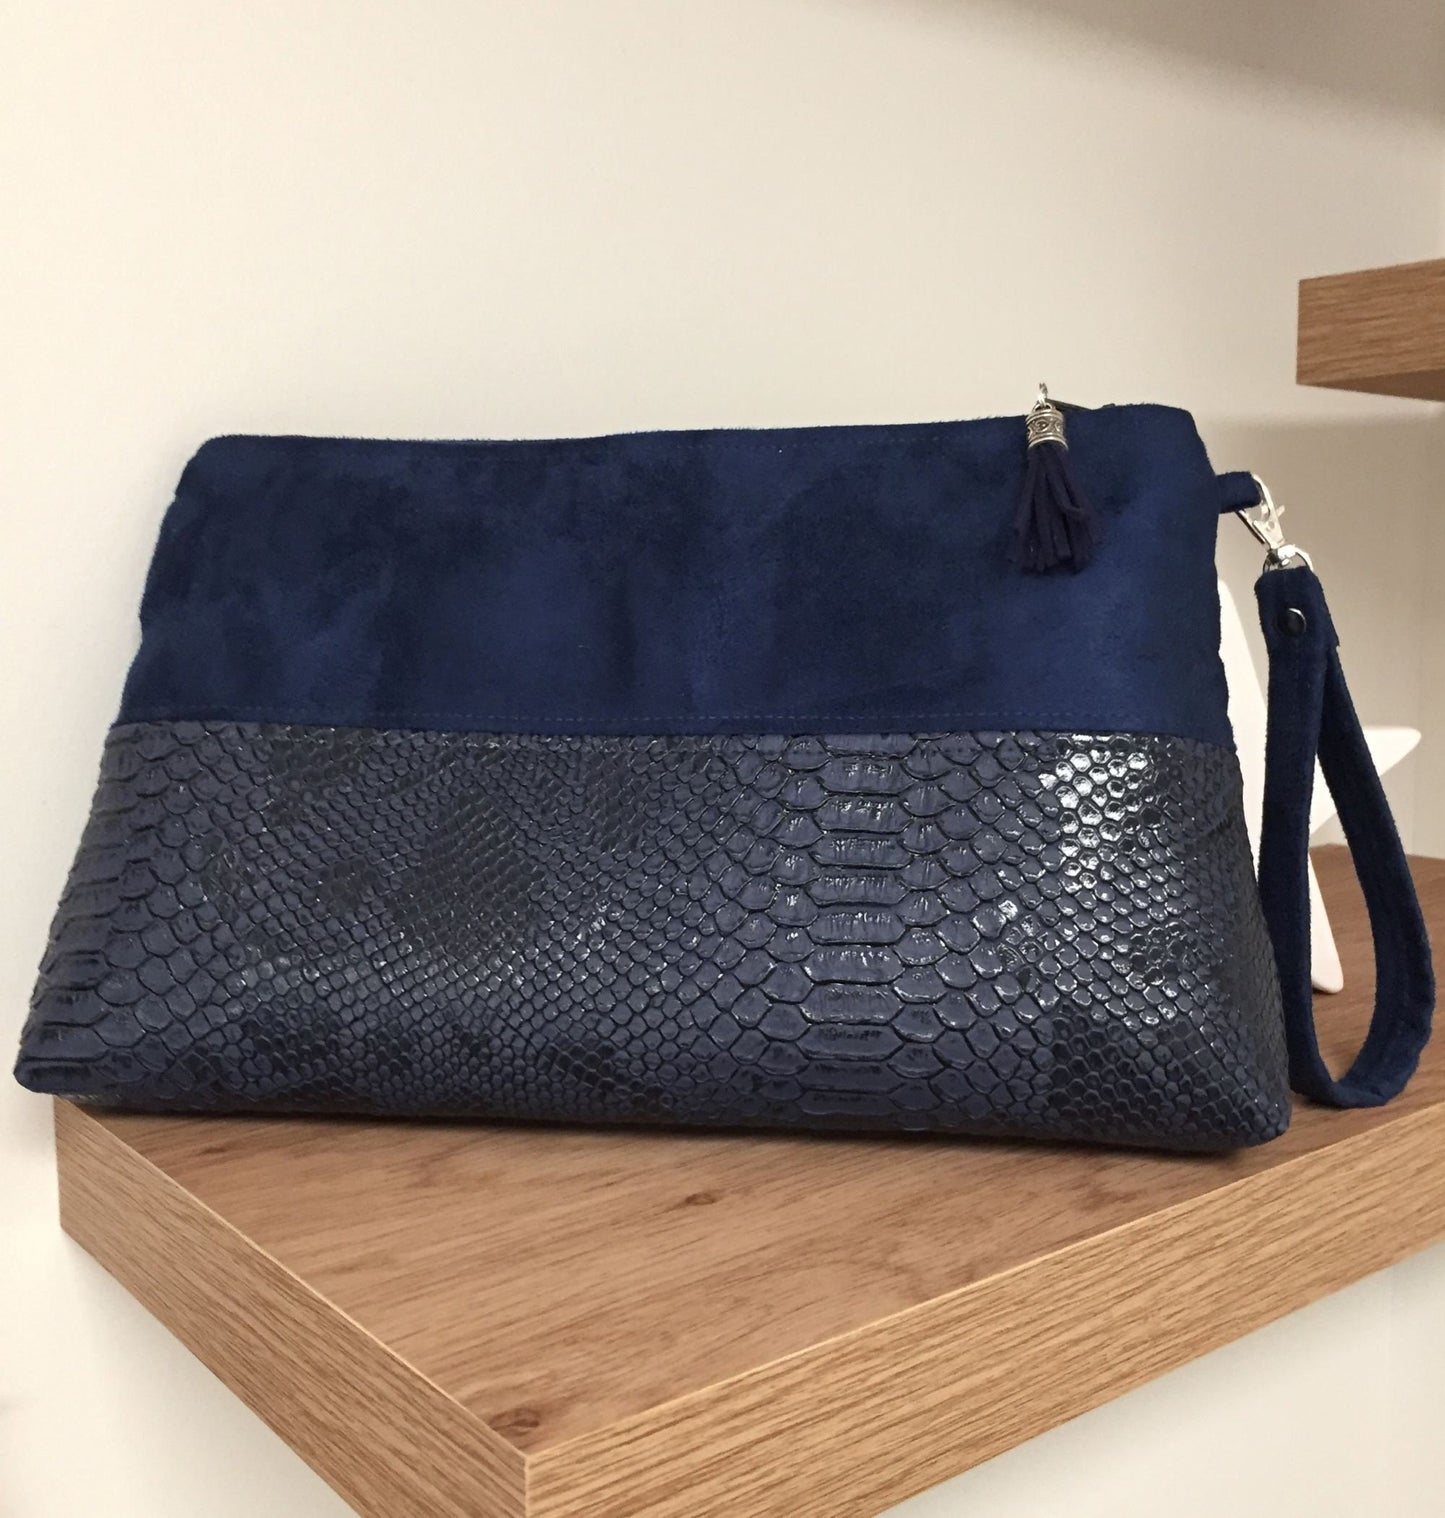 The Isa navy blue reptile-style zipped pouch with removable wrist strap